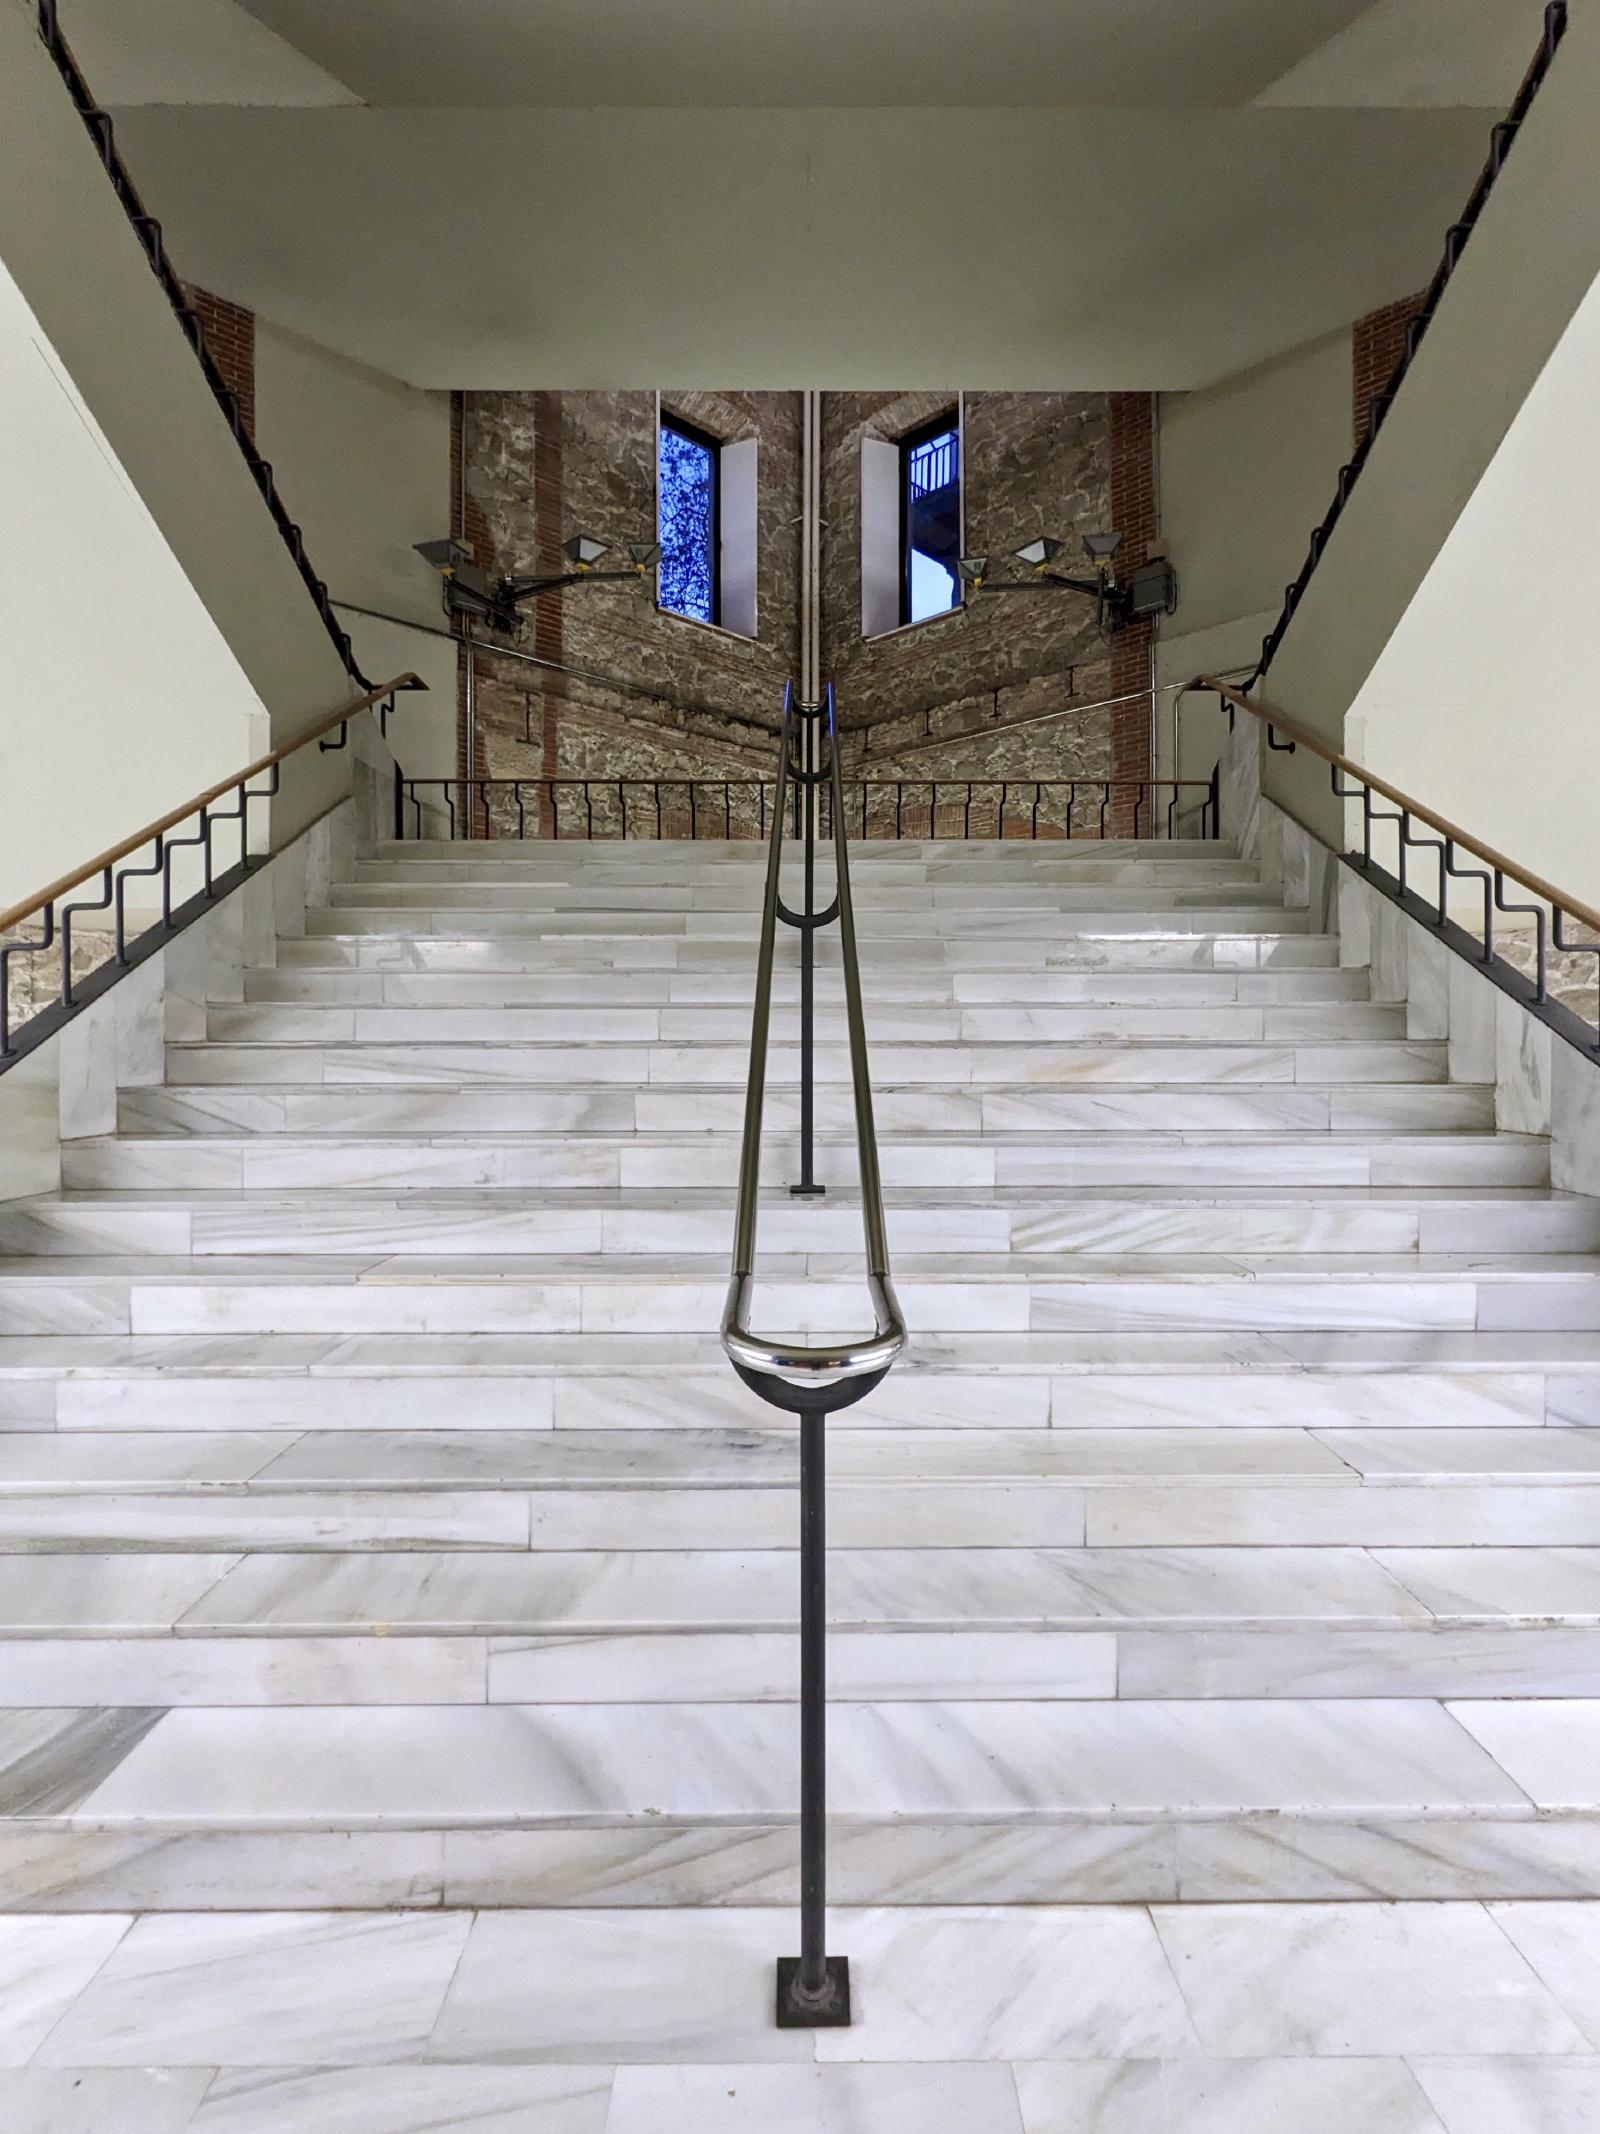 A marble staircase with a central metal railing. In the far back, some bricks from the outer wall are shown.